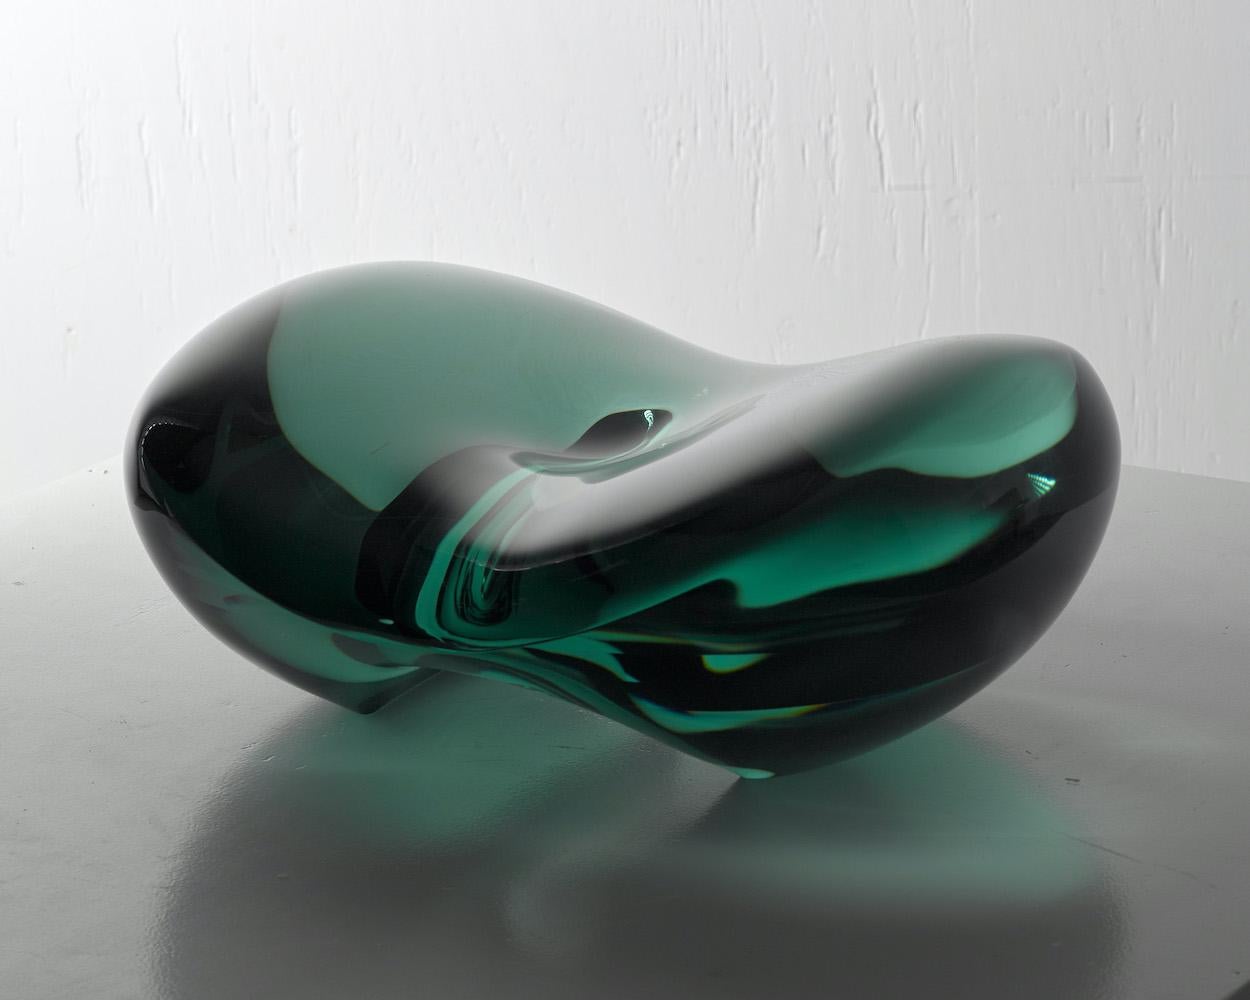 F.171201 is a glass sculpture by Japanese contemporary artist Toshio Iezumi, dimensions are 17 × 42 × 35 cm (6.7 × 16.5 × 13.8 in). 
The sculpture is signed and numbered, it is part of a limited edition of 3 editions, and comes with a certificate of